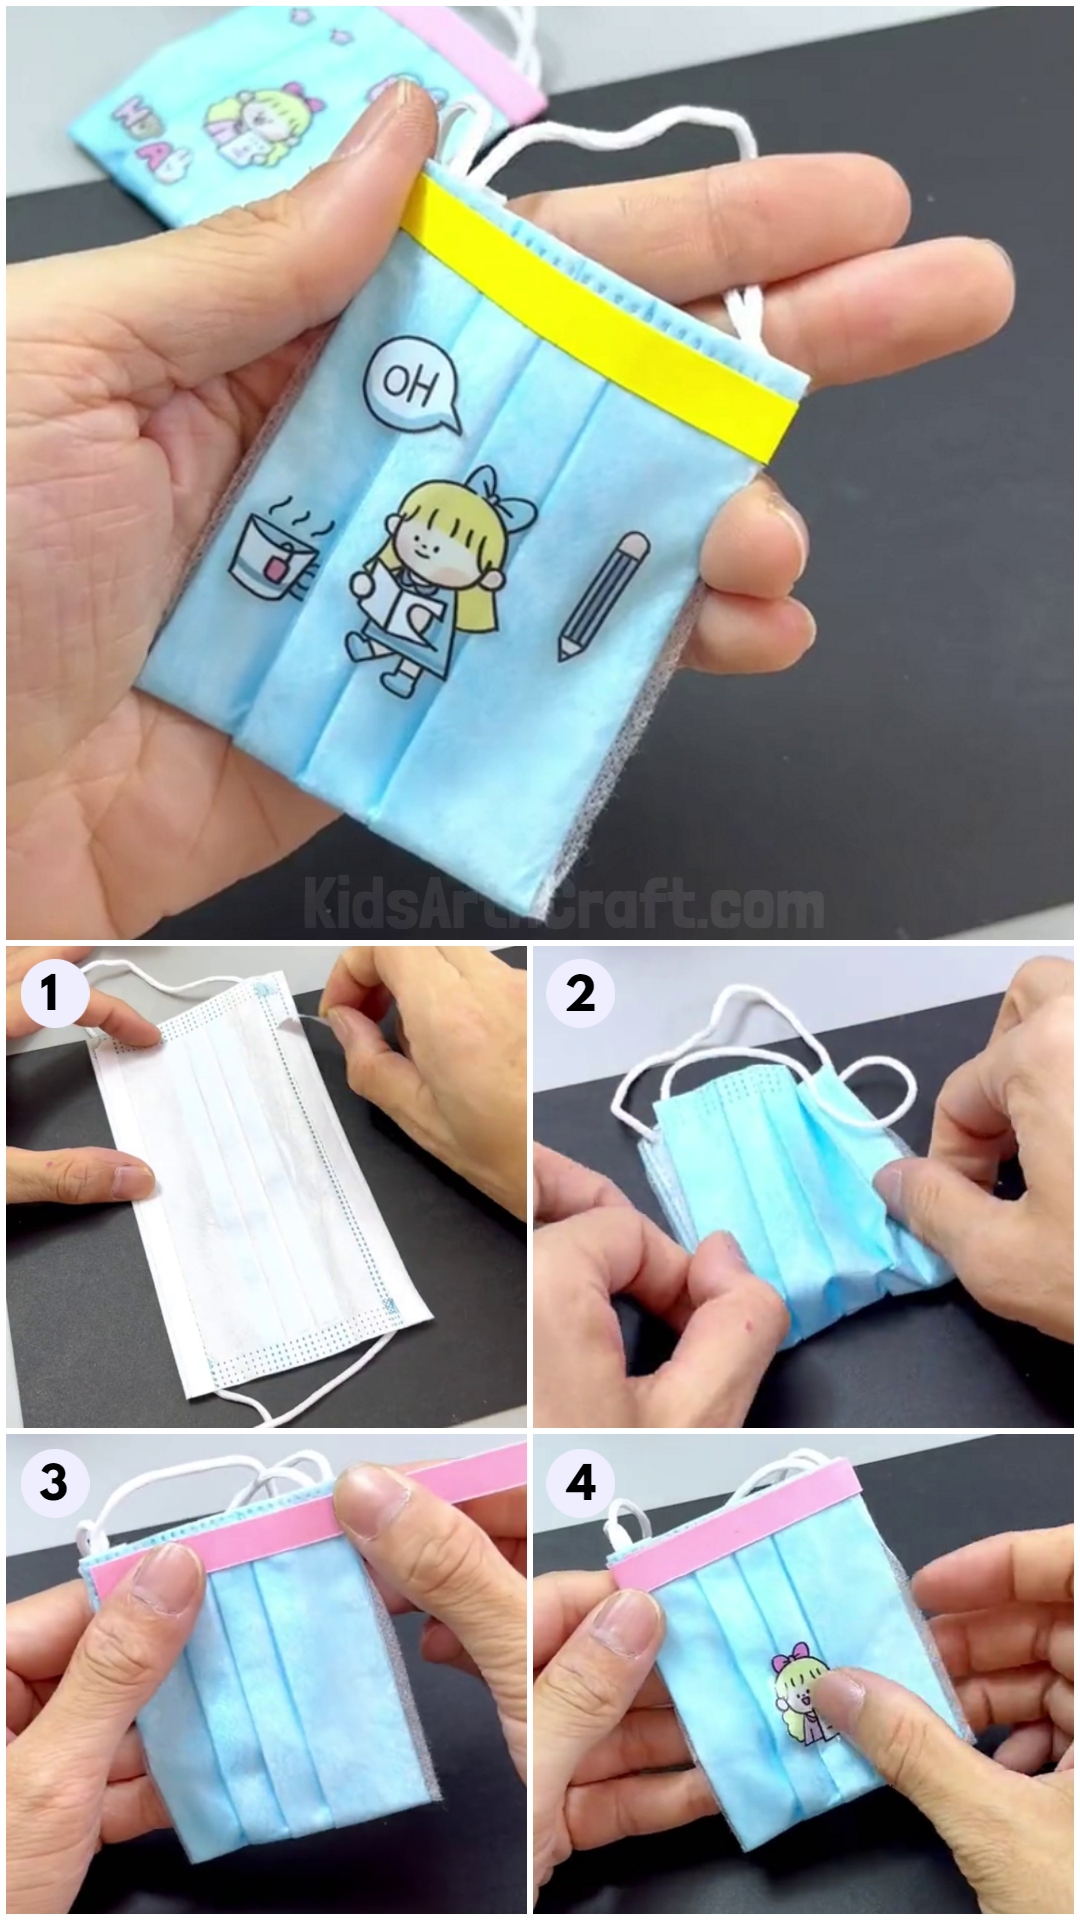 DIY Surgical Mask pouch easy tutorial